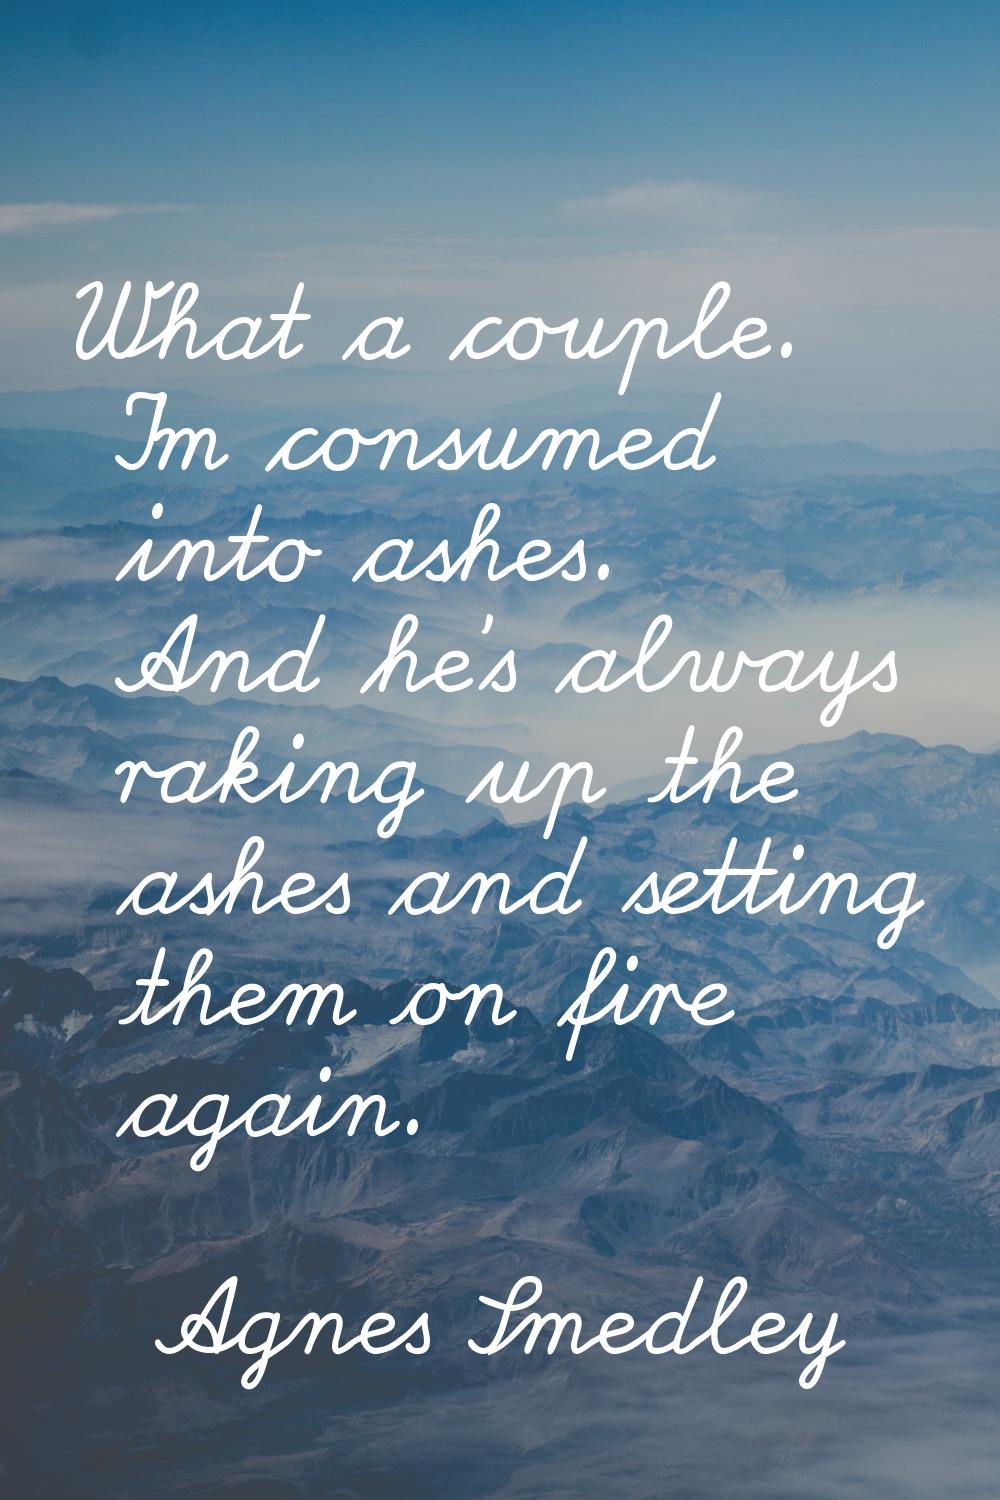 What a couple. I'm consumed into ashes. And he's always raking up the ashes and setting them on fir